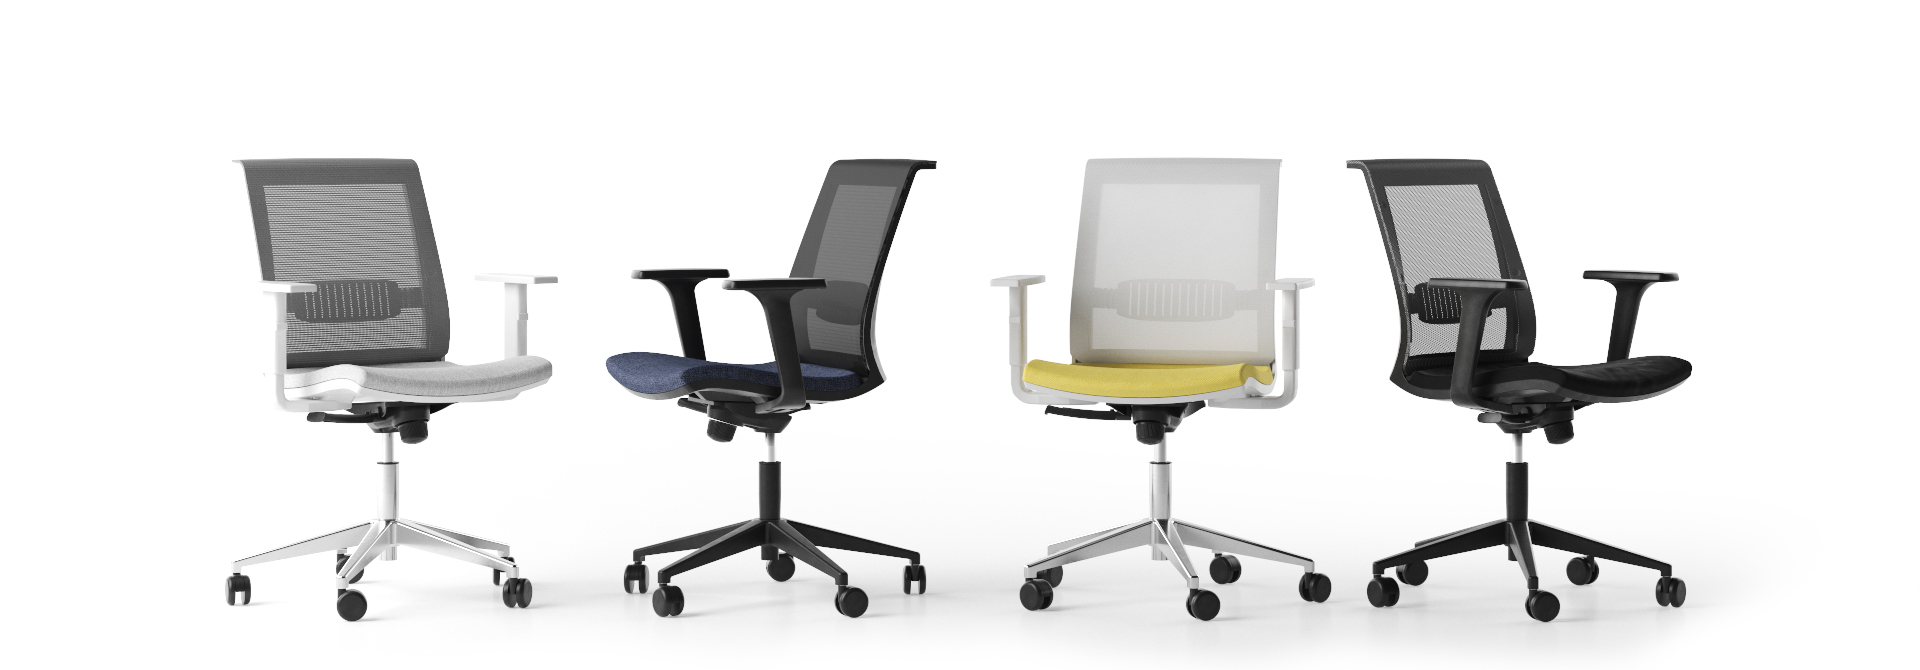 EvaOne Chair range showing 4 chairs each equipped differently